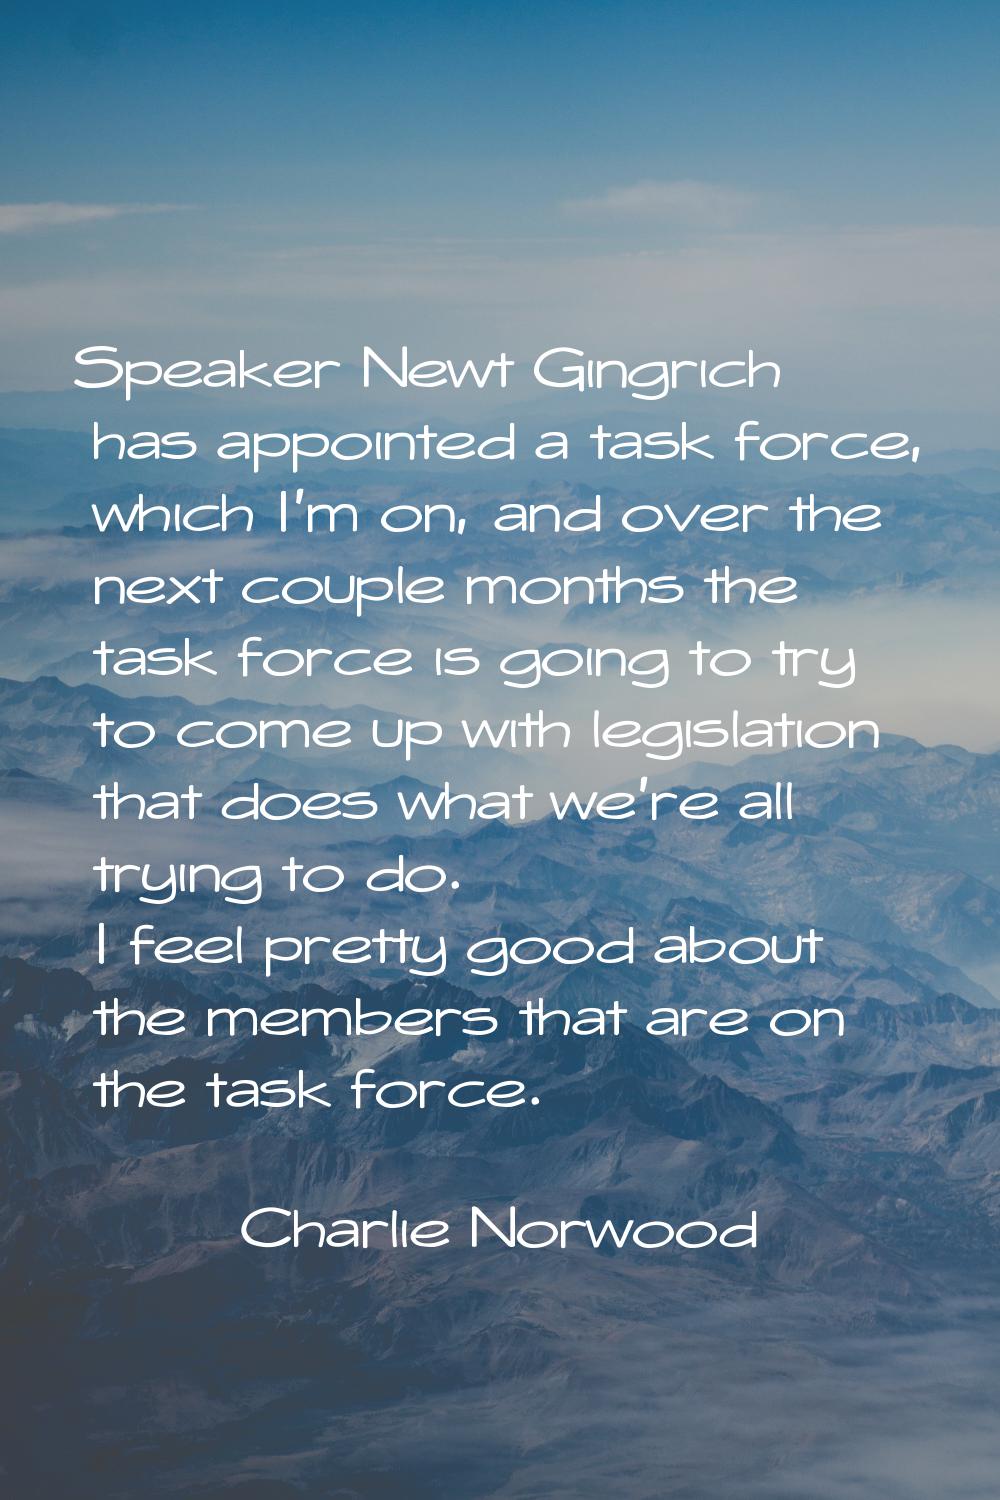 Speaker Newt Gingrich has appointed a task force, which I'm on, and over the next couple months the